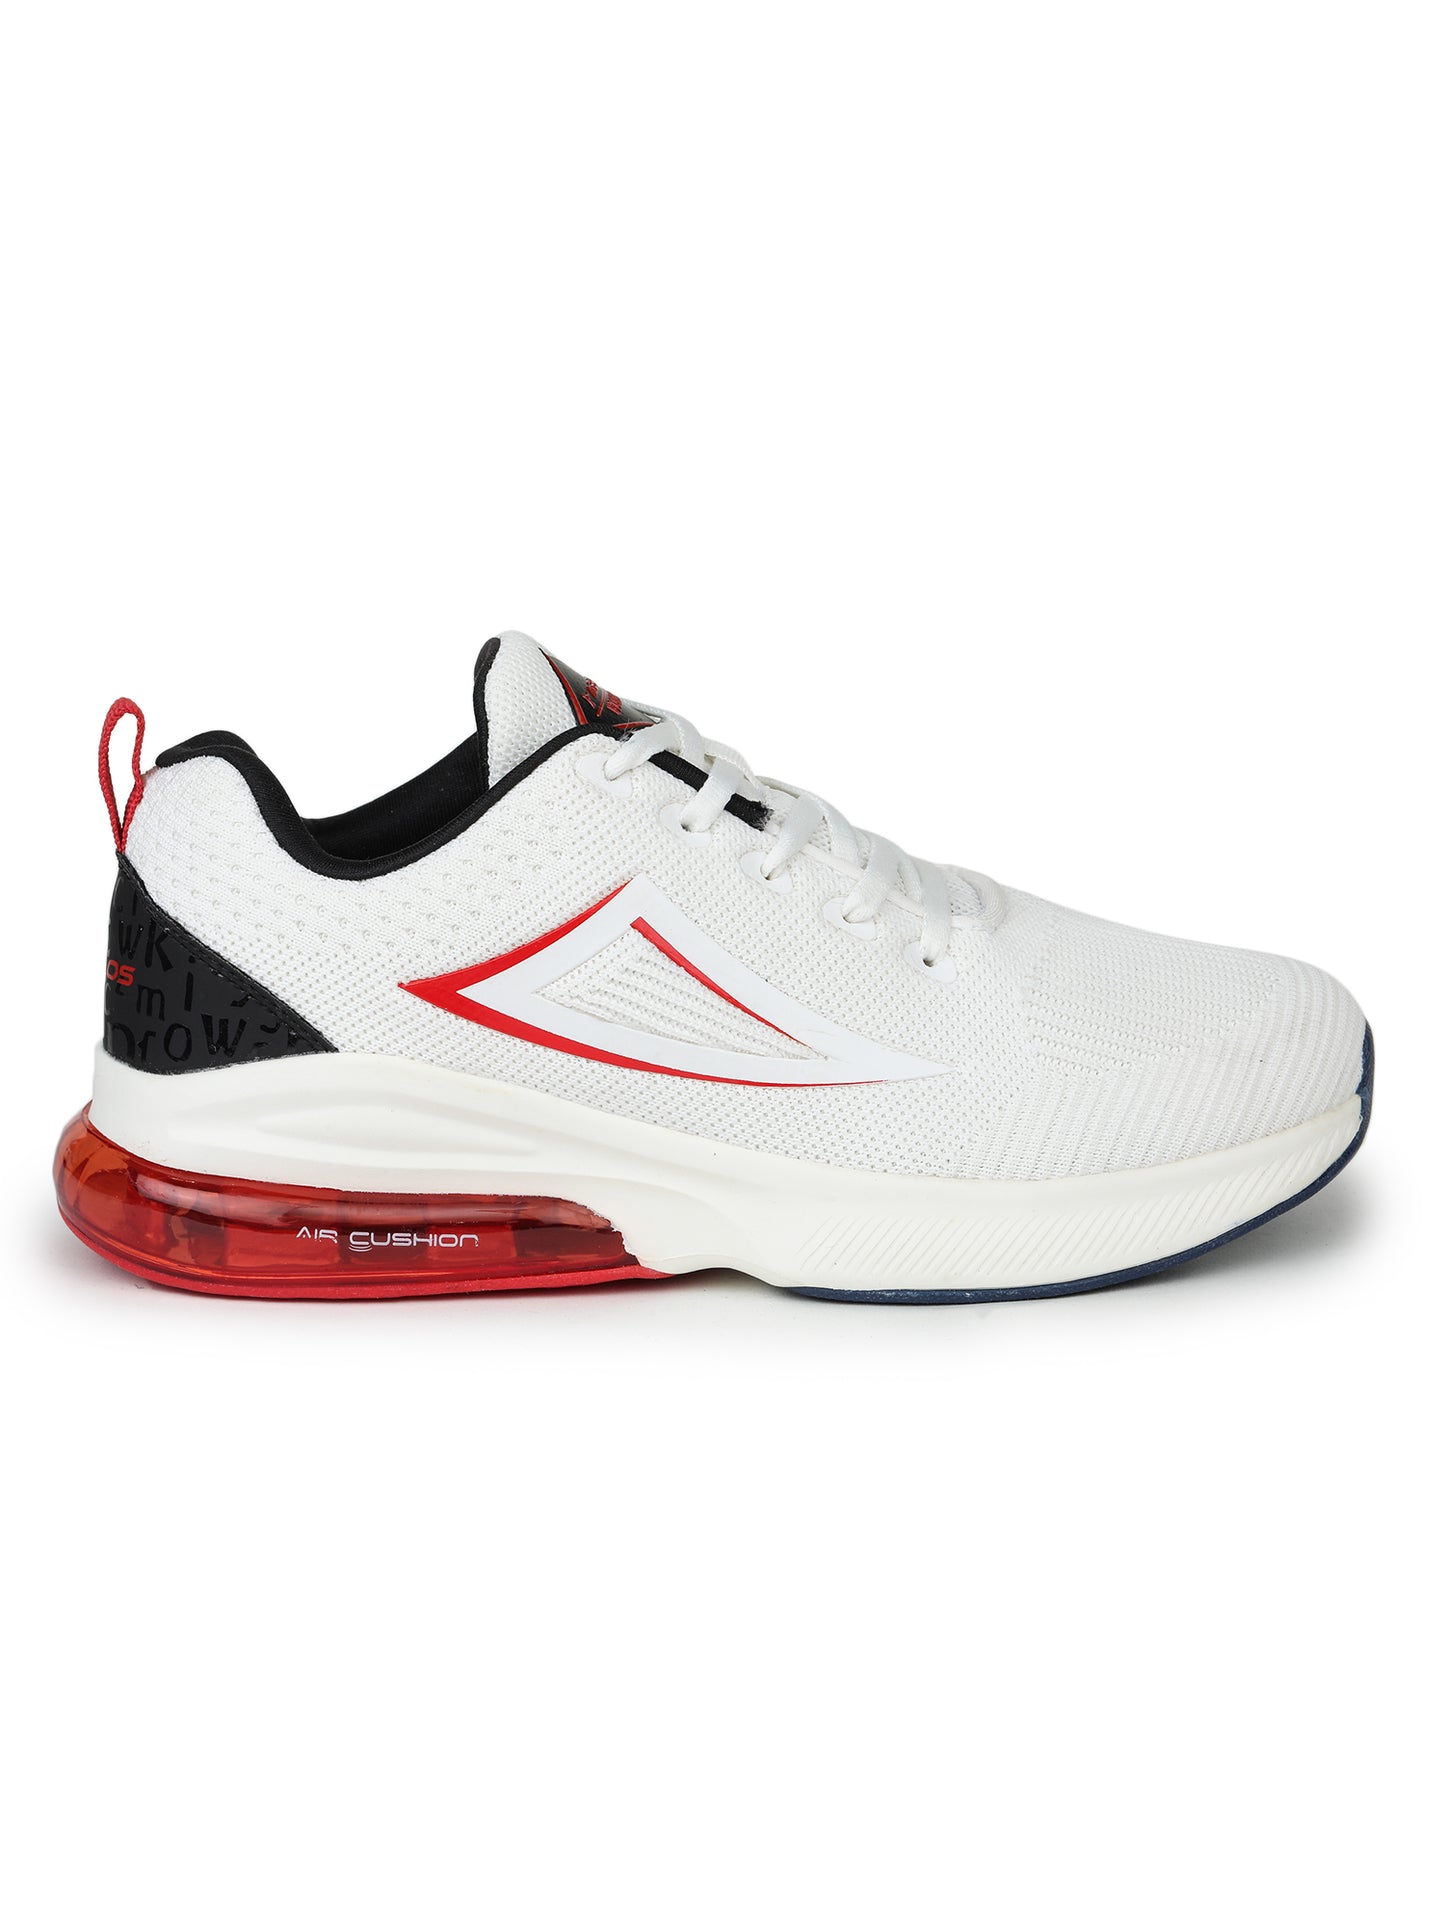 ABROS GALAXY-PRO SPORT-SHOES For MEN'S